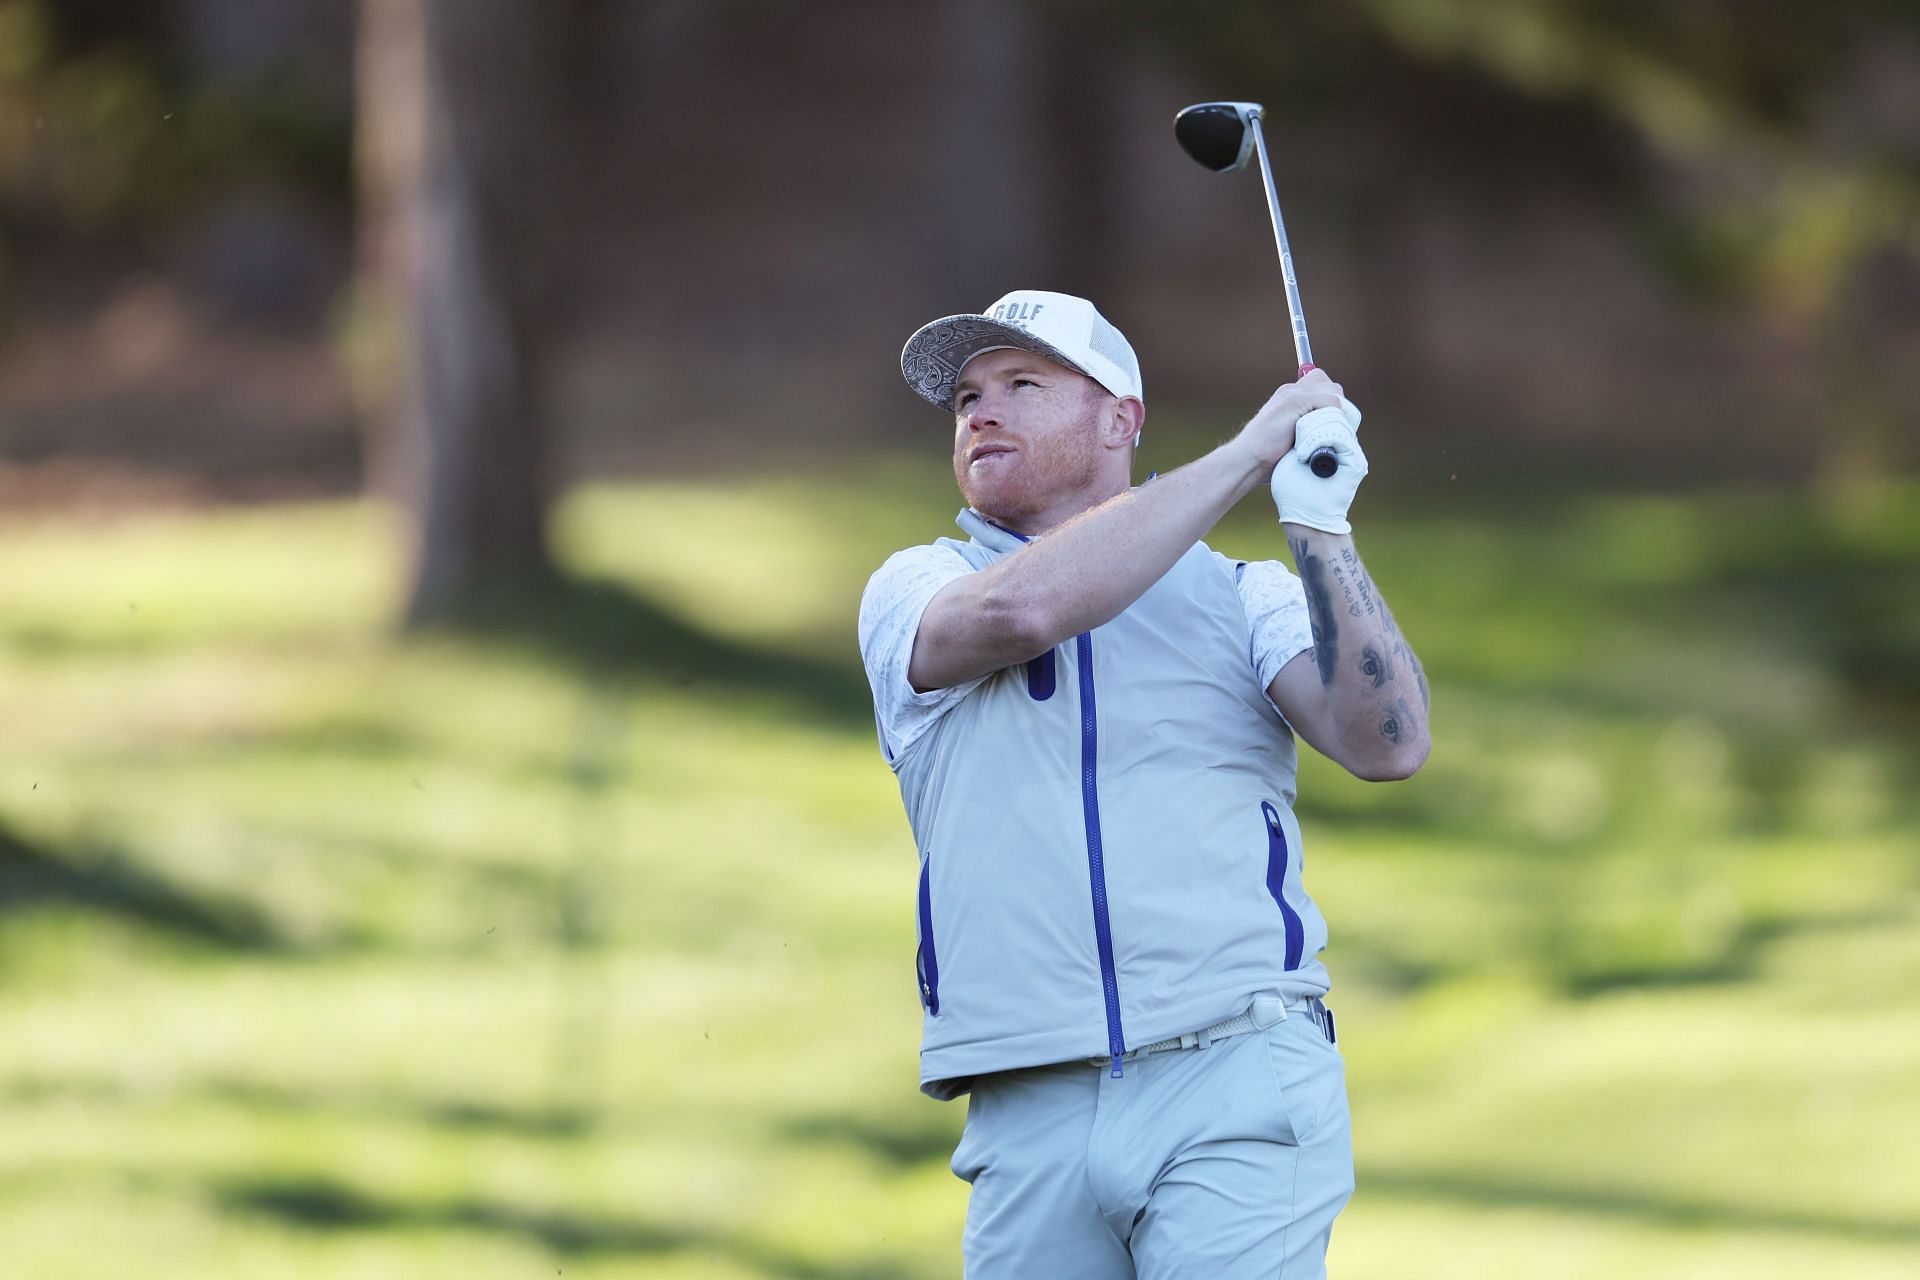 Canelo Alvarez will play in a golf legends tournament called Icon Series alongside other sports icons. (Photo by Getty Images)